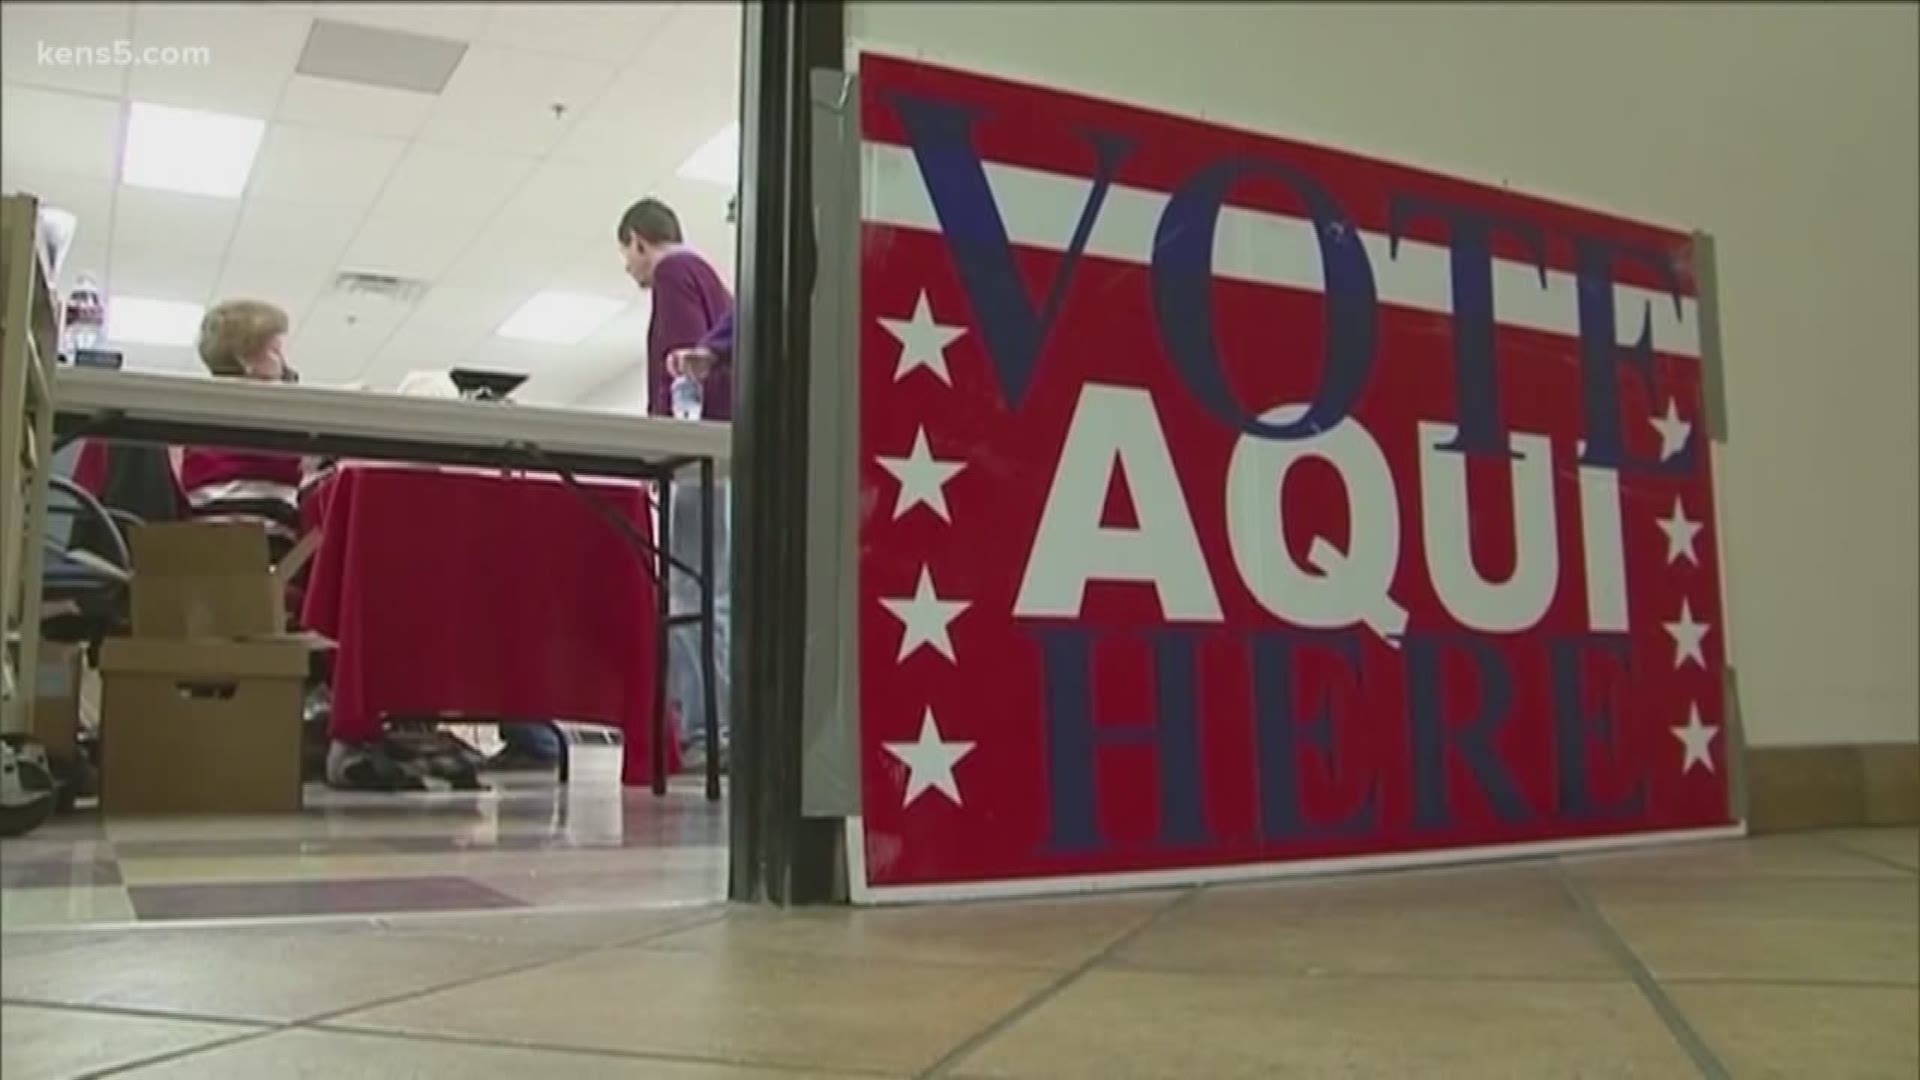 Texans have just one week left to register to vote in a mid-term election that is shattering records in terms of voter registration and participation.